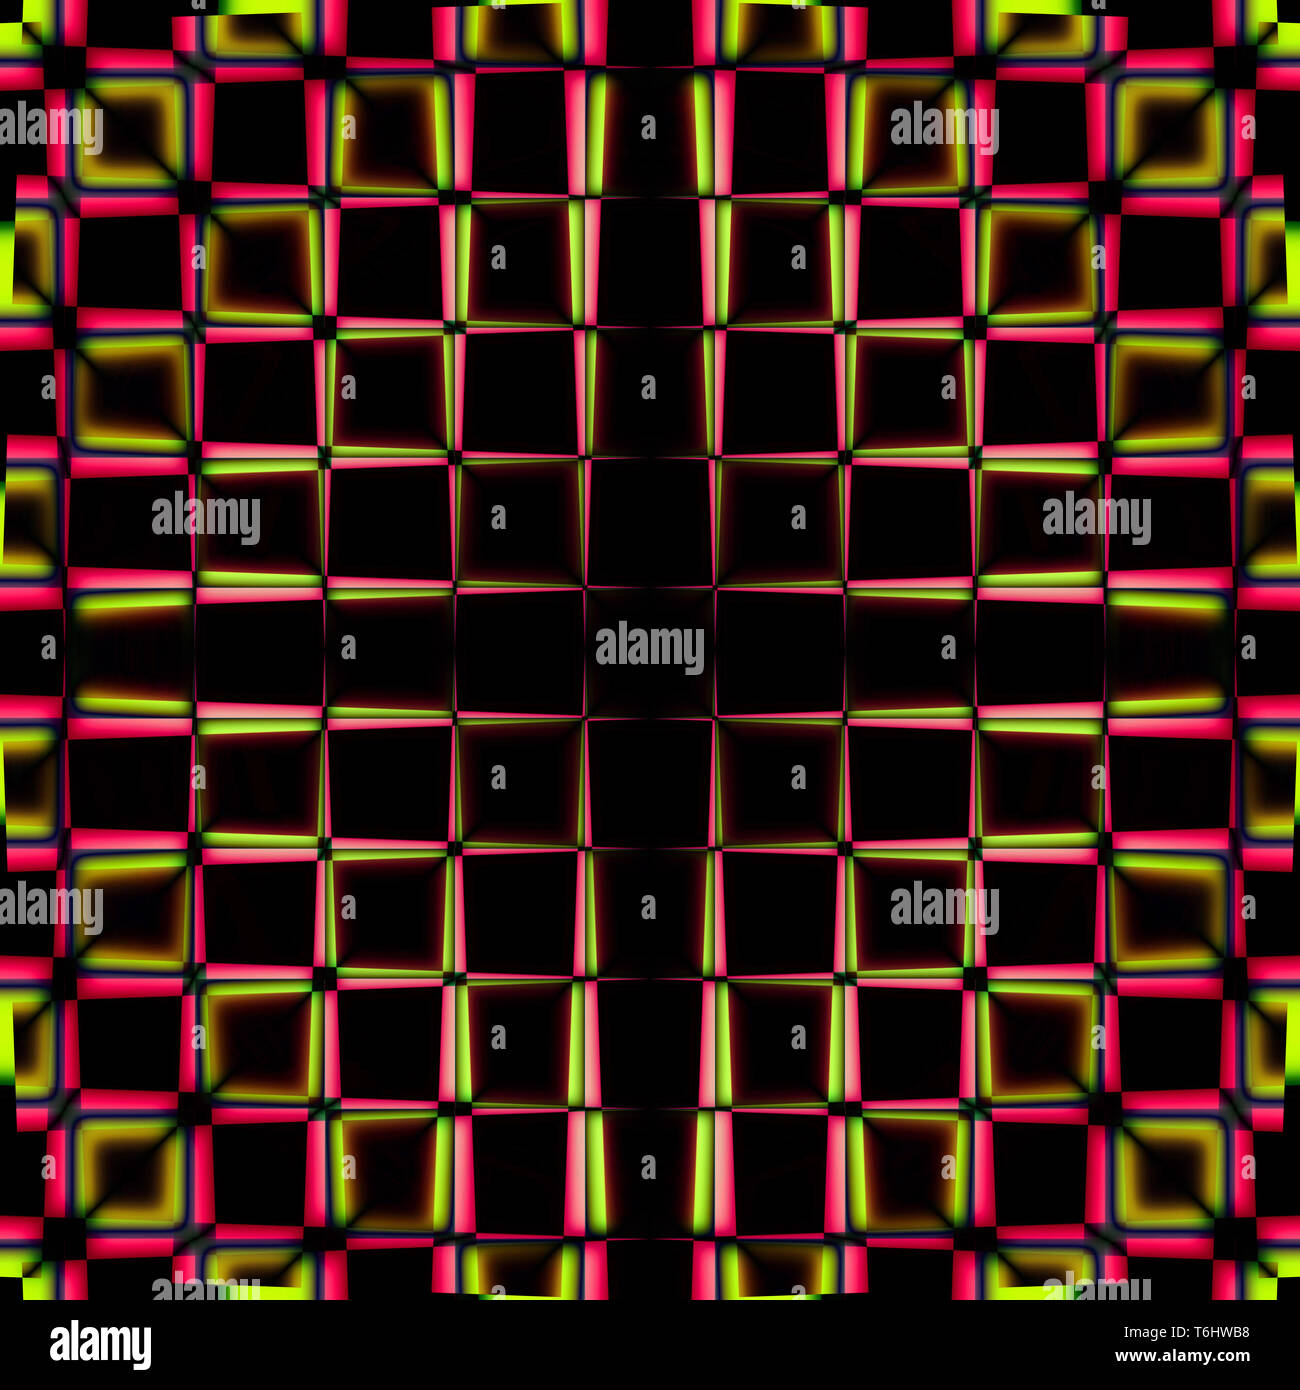 Red and yellow squares pattern Stock Photo